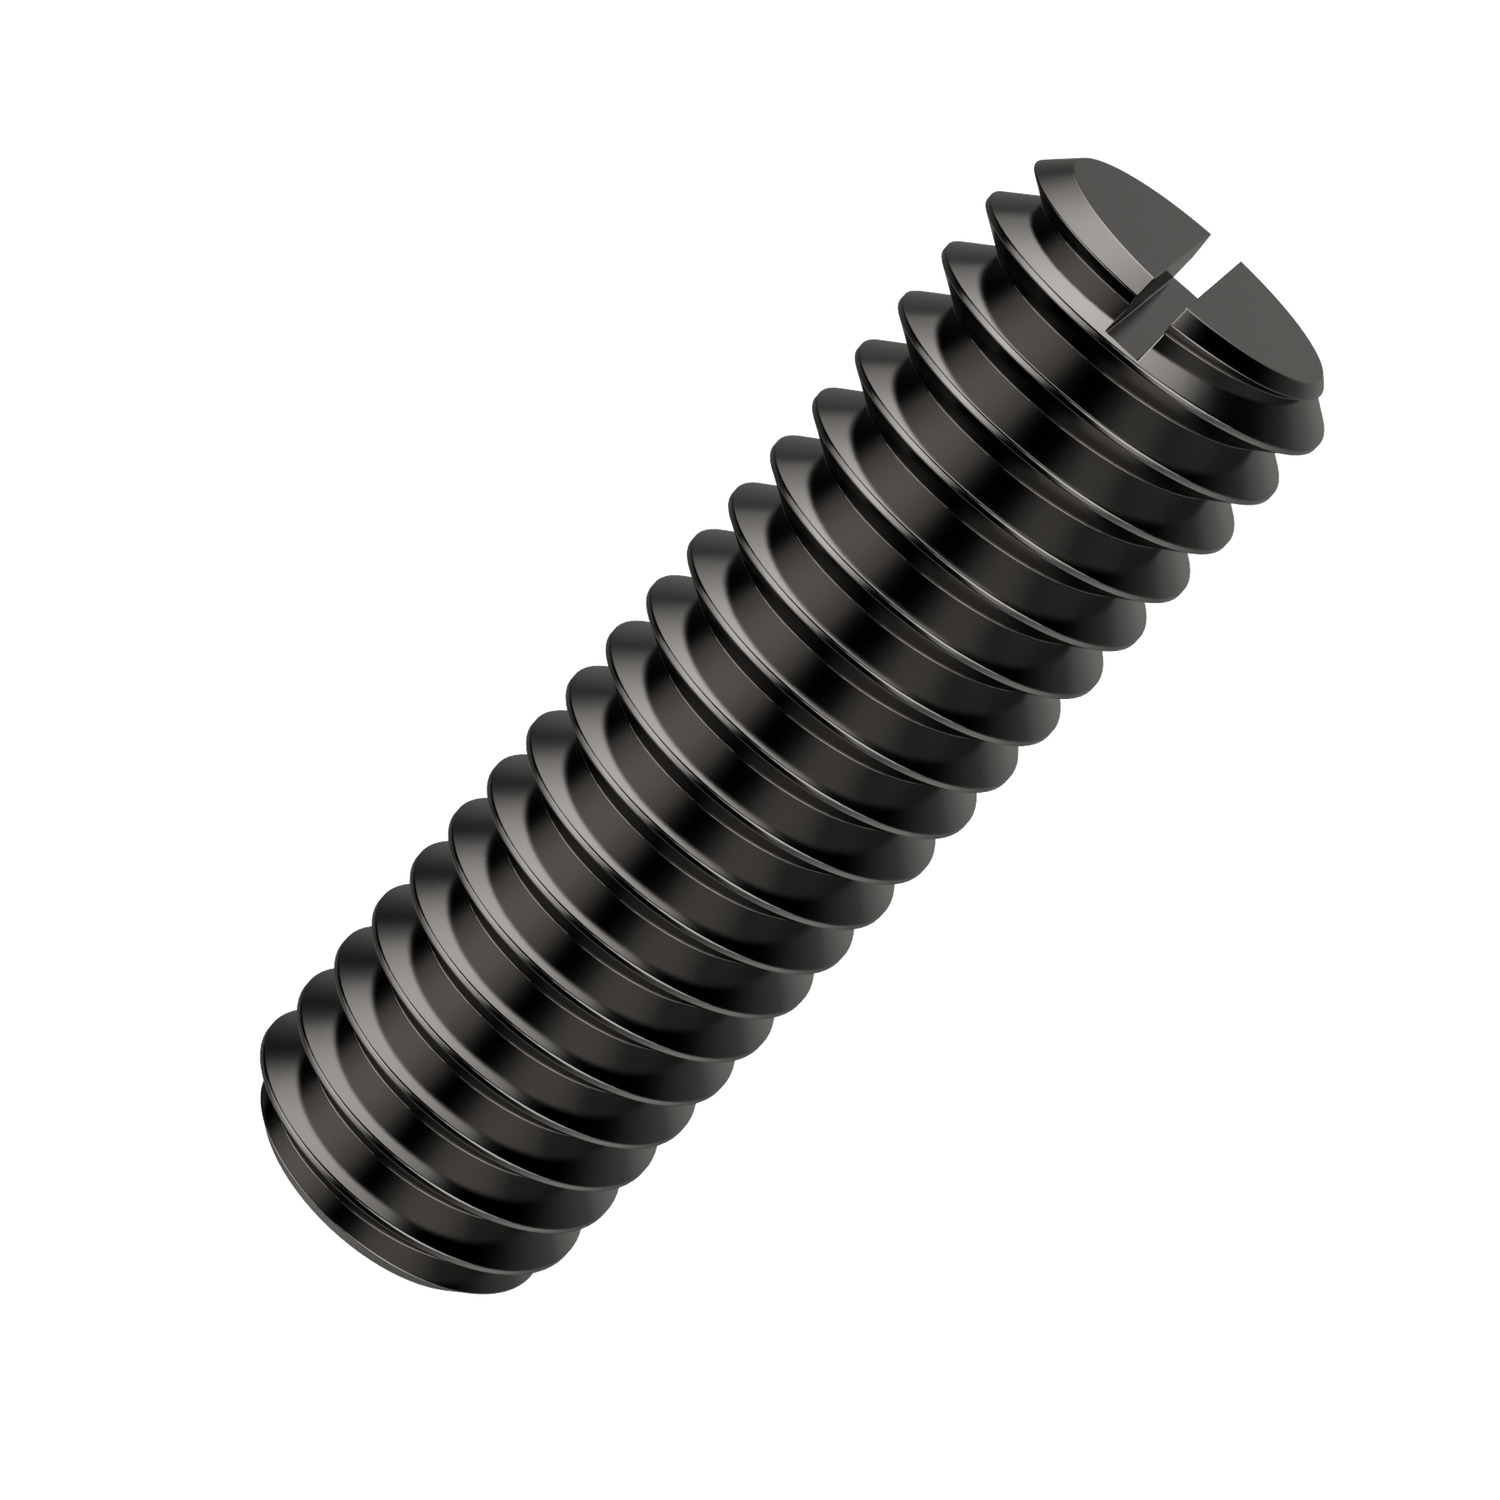 34300.W0088 Threaded rod - WHILE STOCKS LAST! M8 - 70. Please note, supplied in multiples of 10  WHILE STOCKS LAST!